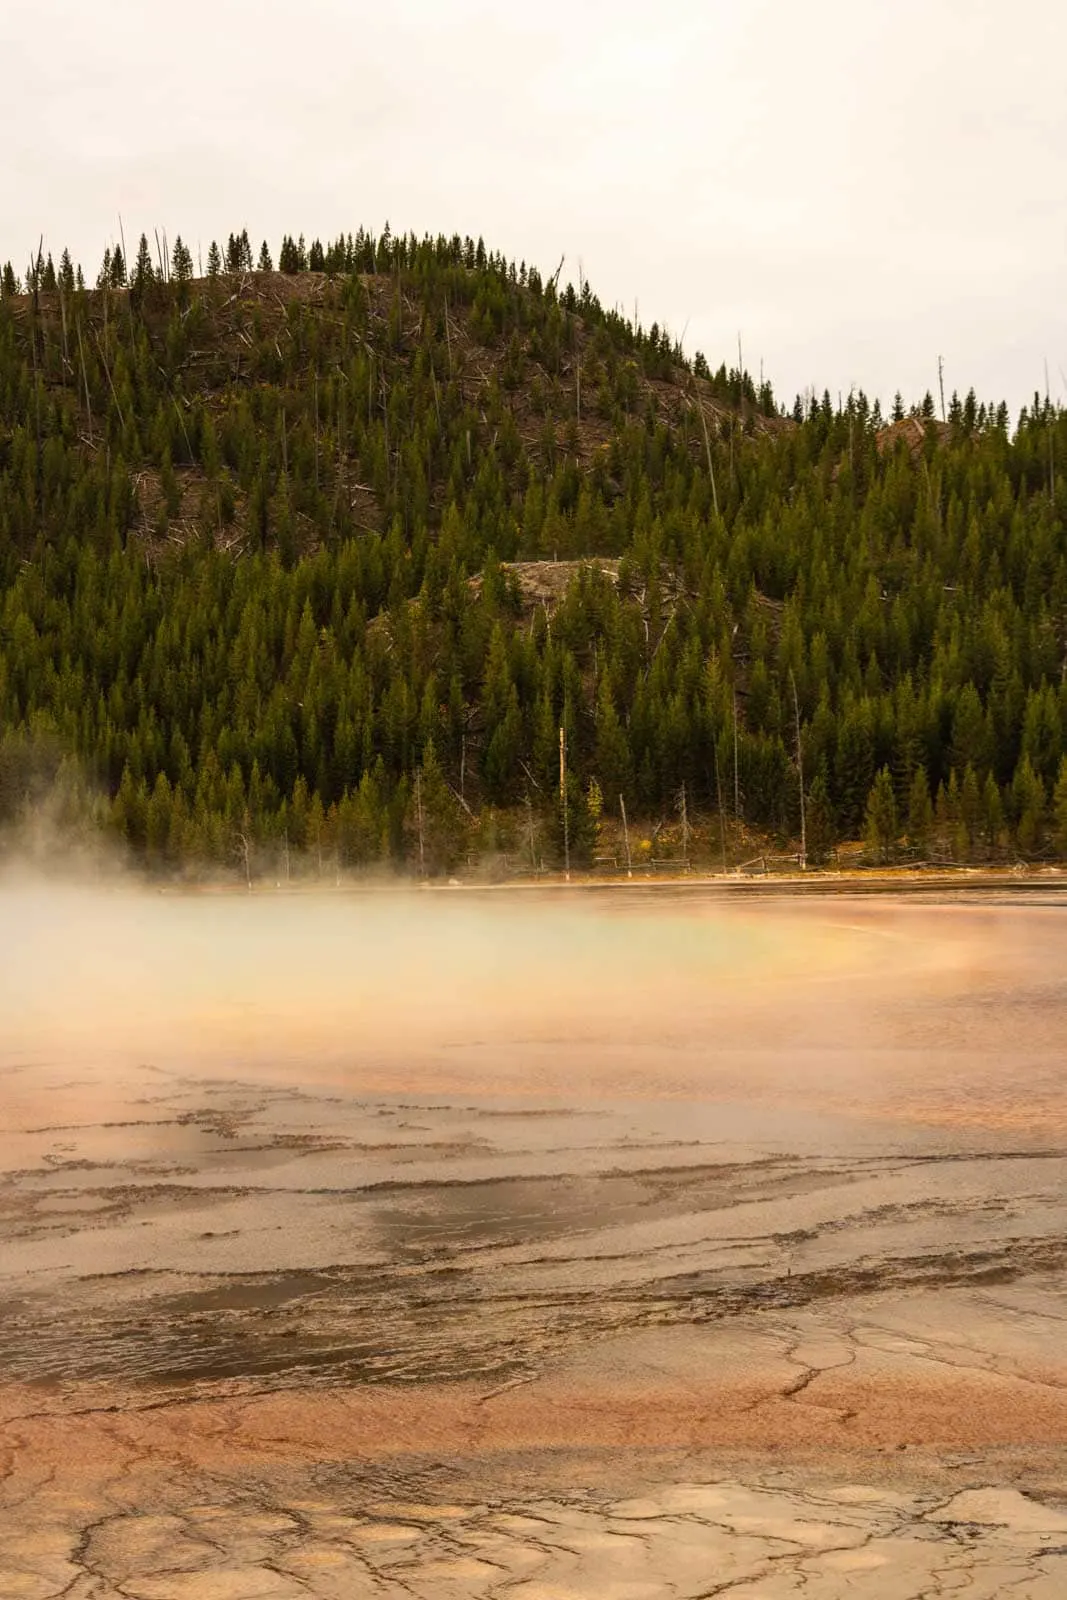 A view of Grand Prismatic from below is a must see on your Yellowstone itinerary